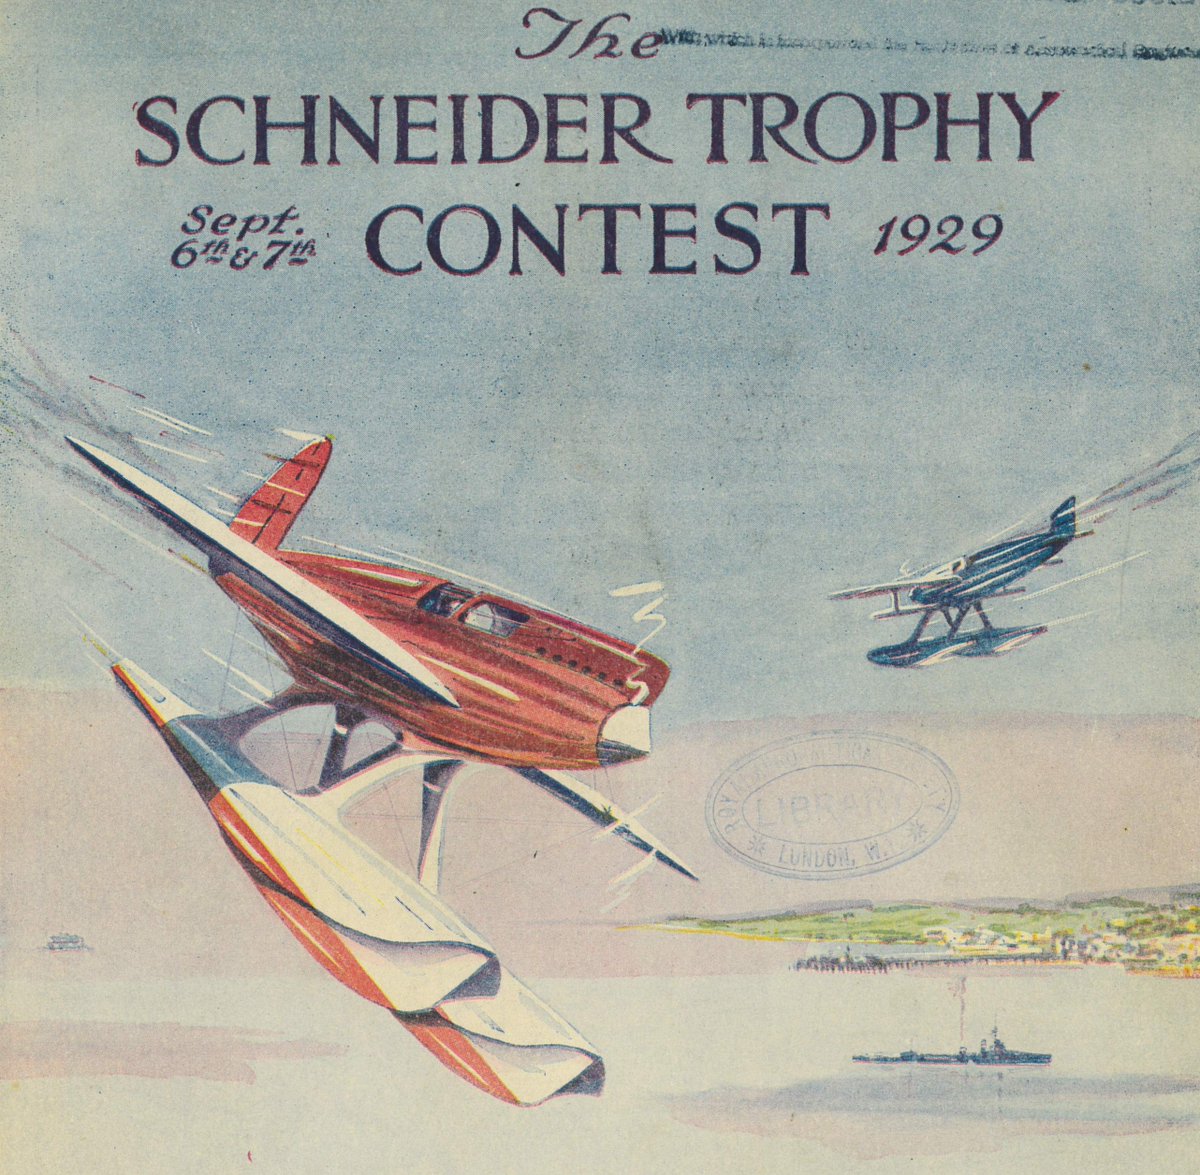 Schneider Trophy contest in interwar period drove aviation innovation, paving the way for Spitfire and Merlin engine. W. Cox recounts each contest, showcasing advancements in aircraft design. Listen here: ow.ly/PWZY50RcooU